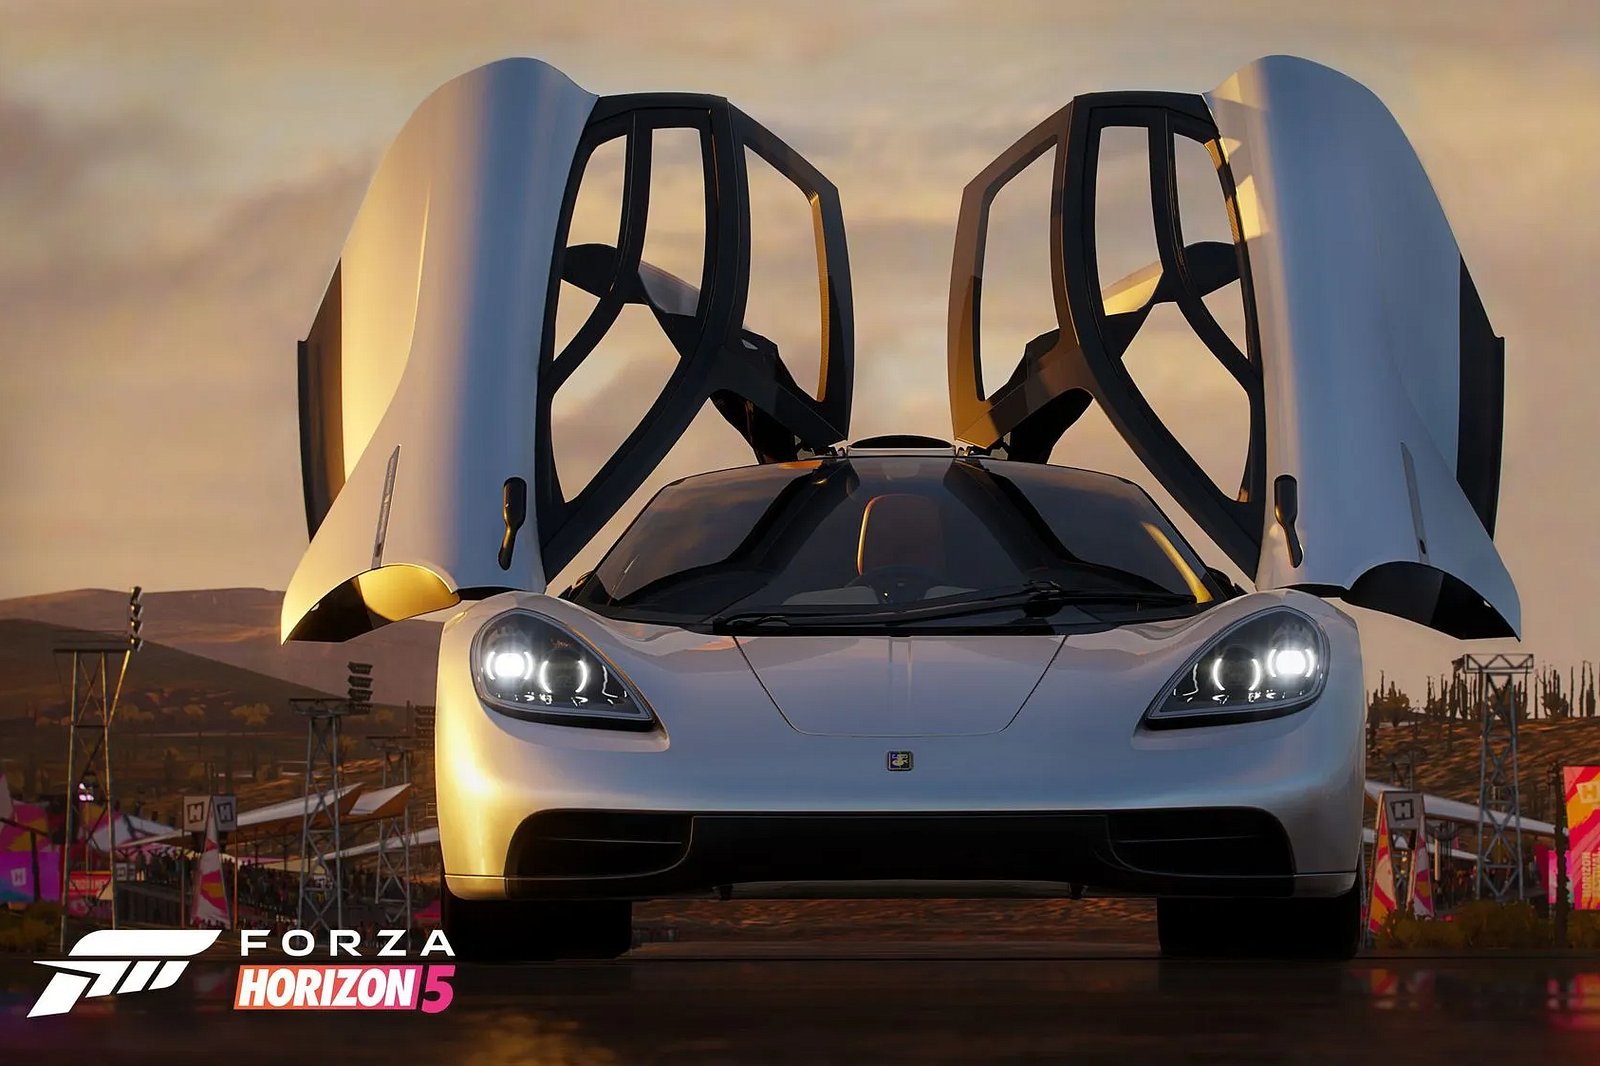 Forza Horizon 4 Series 14 Update Now Available: More McLarens, VW